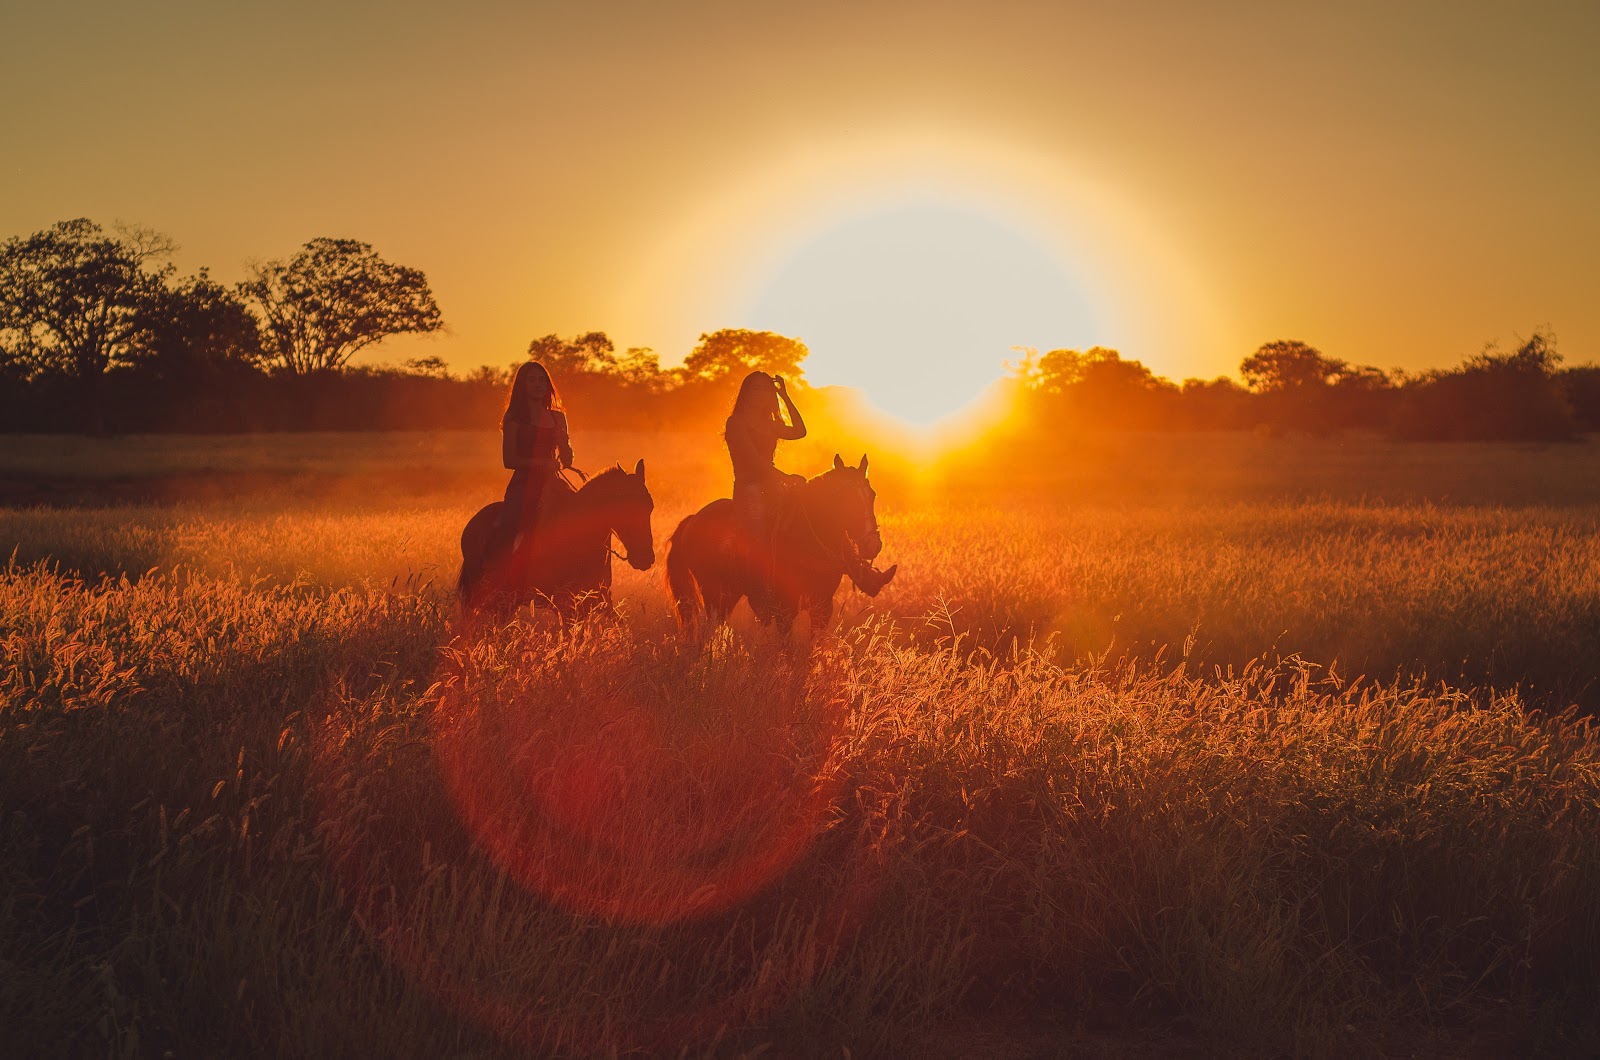 silhouette-photo-of-two-persons-riding-horses-2714627/animal lovers career